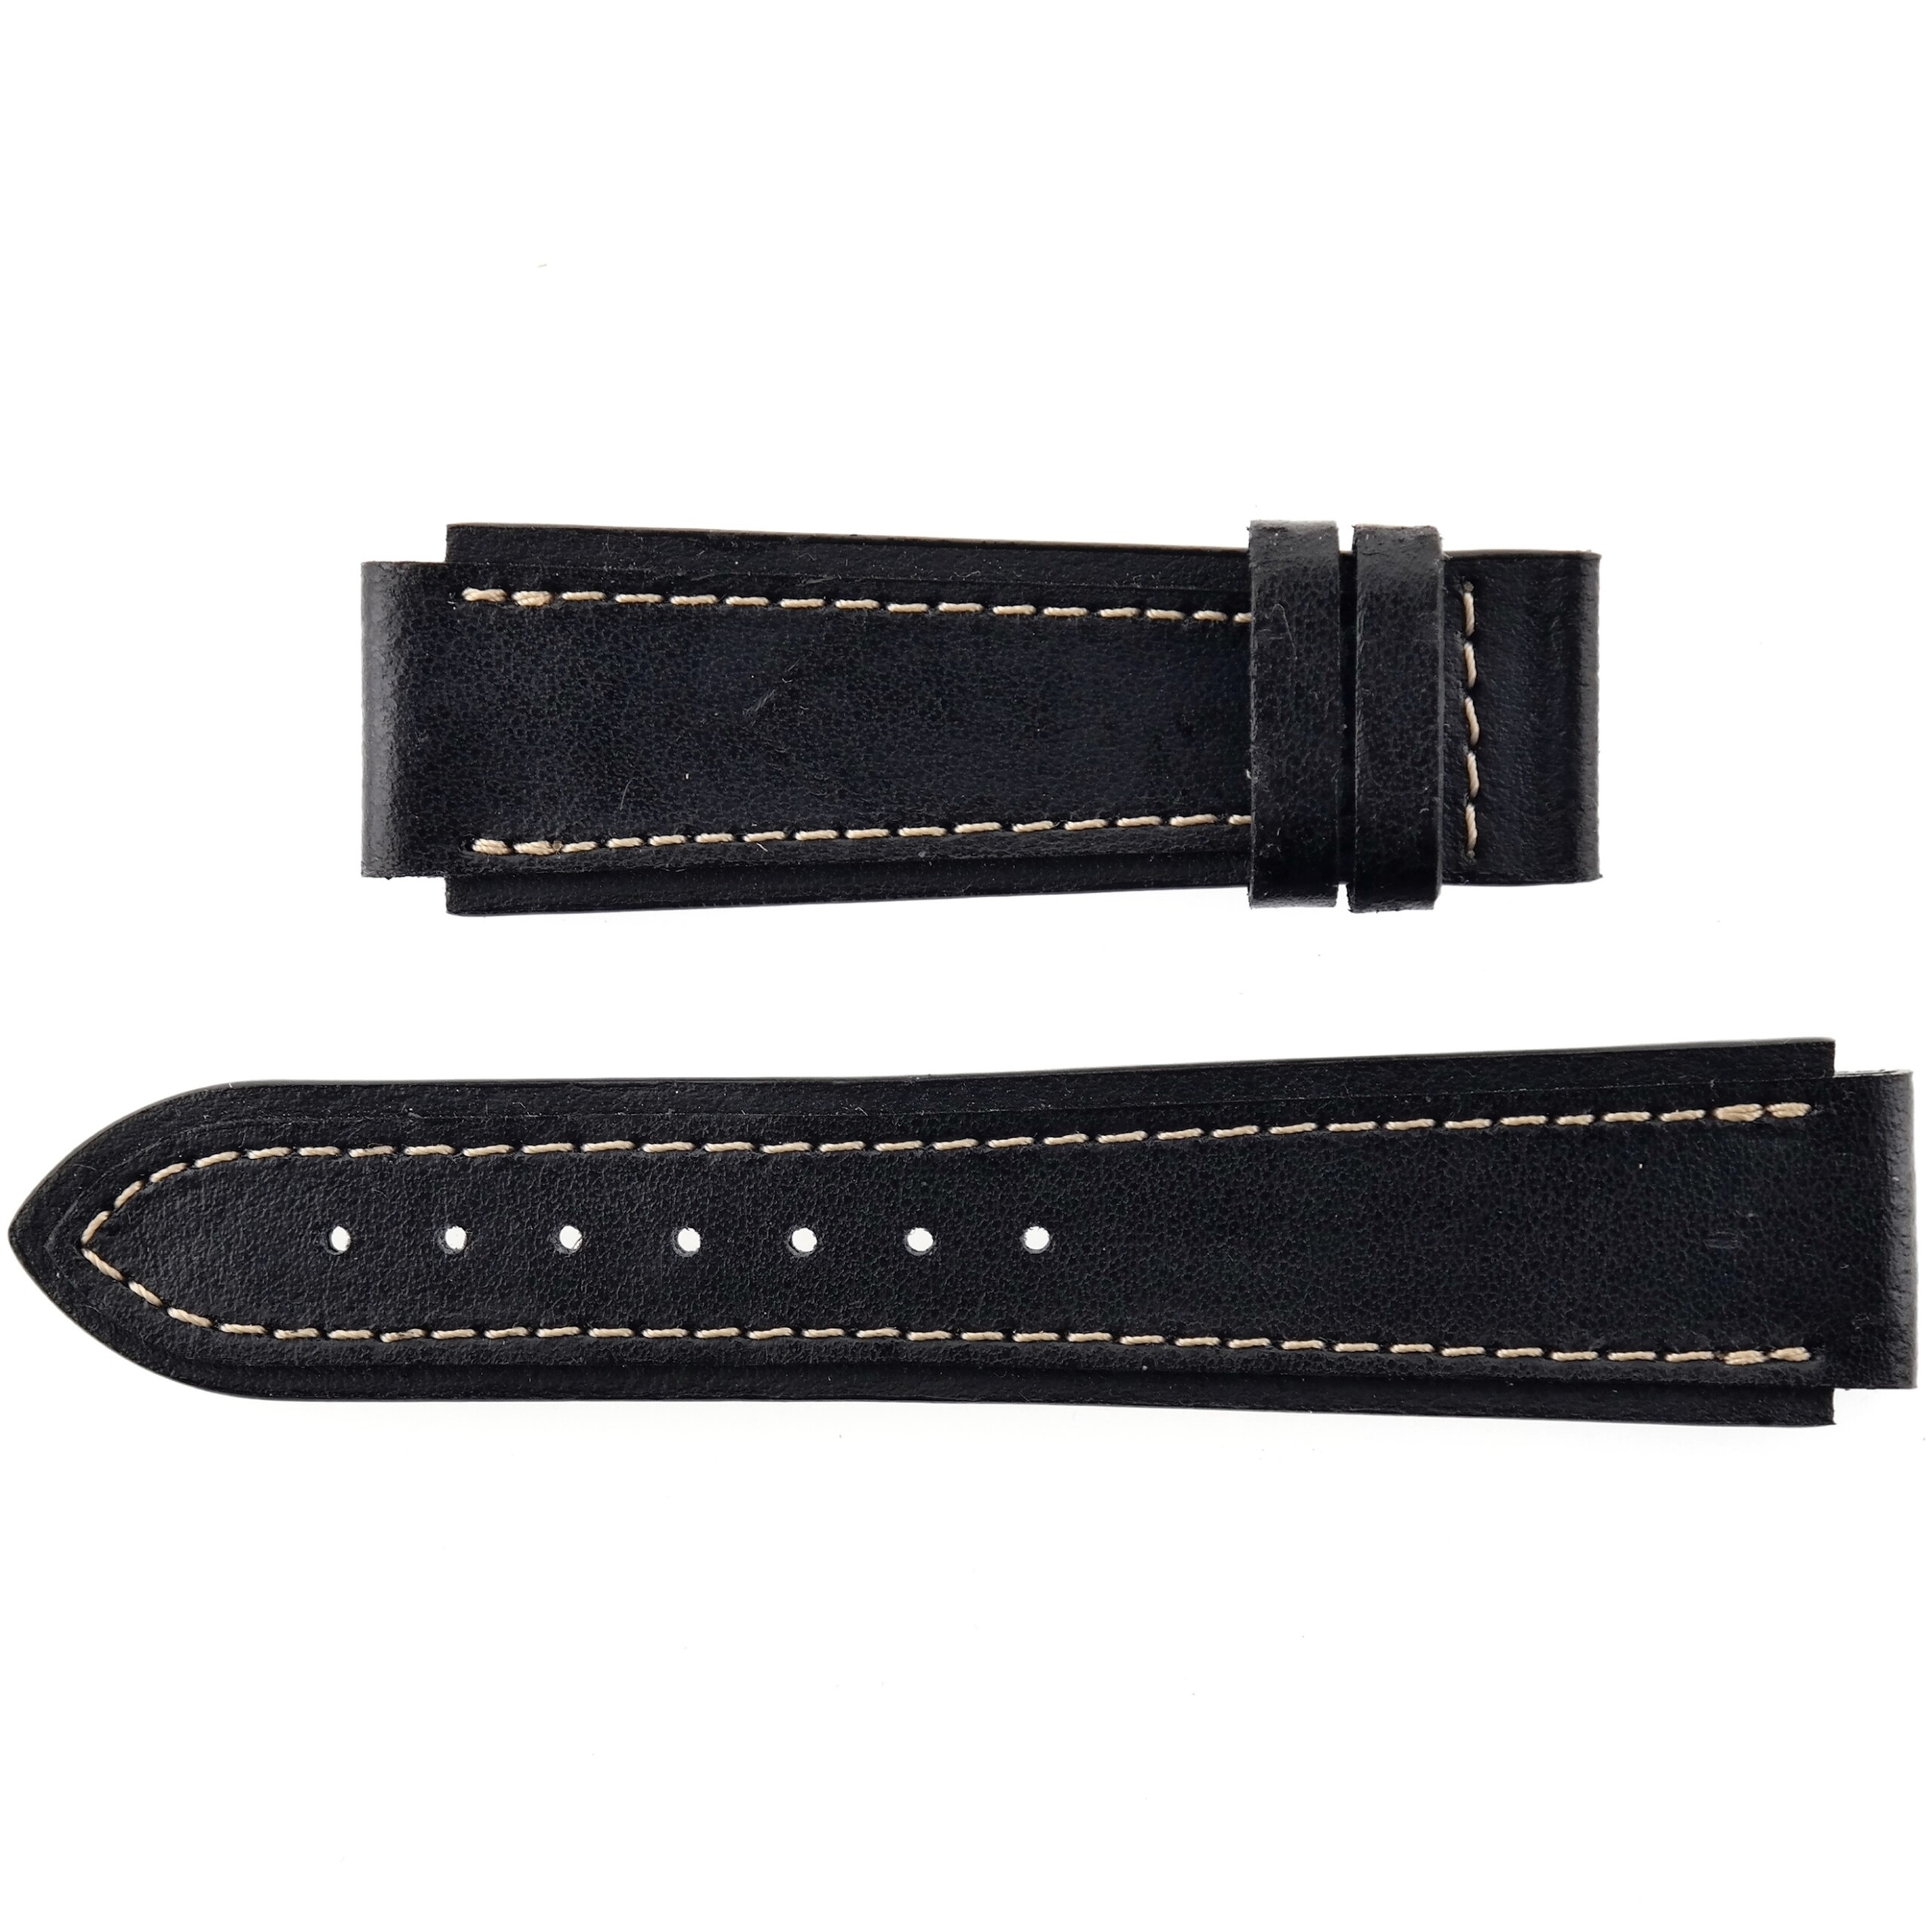 Vintage YEMA Watch Strap - Military/Pilot - 19 mm - Leather - France